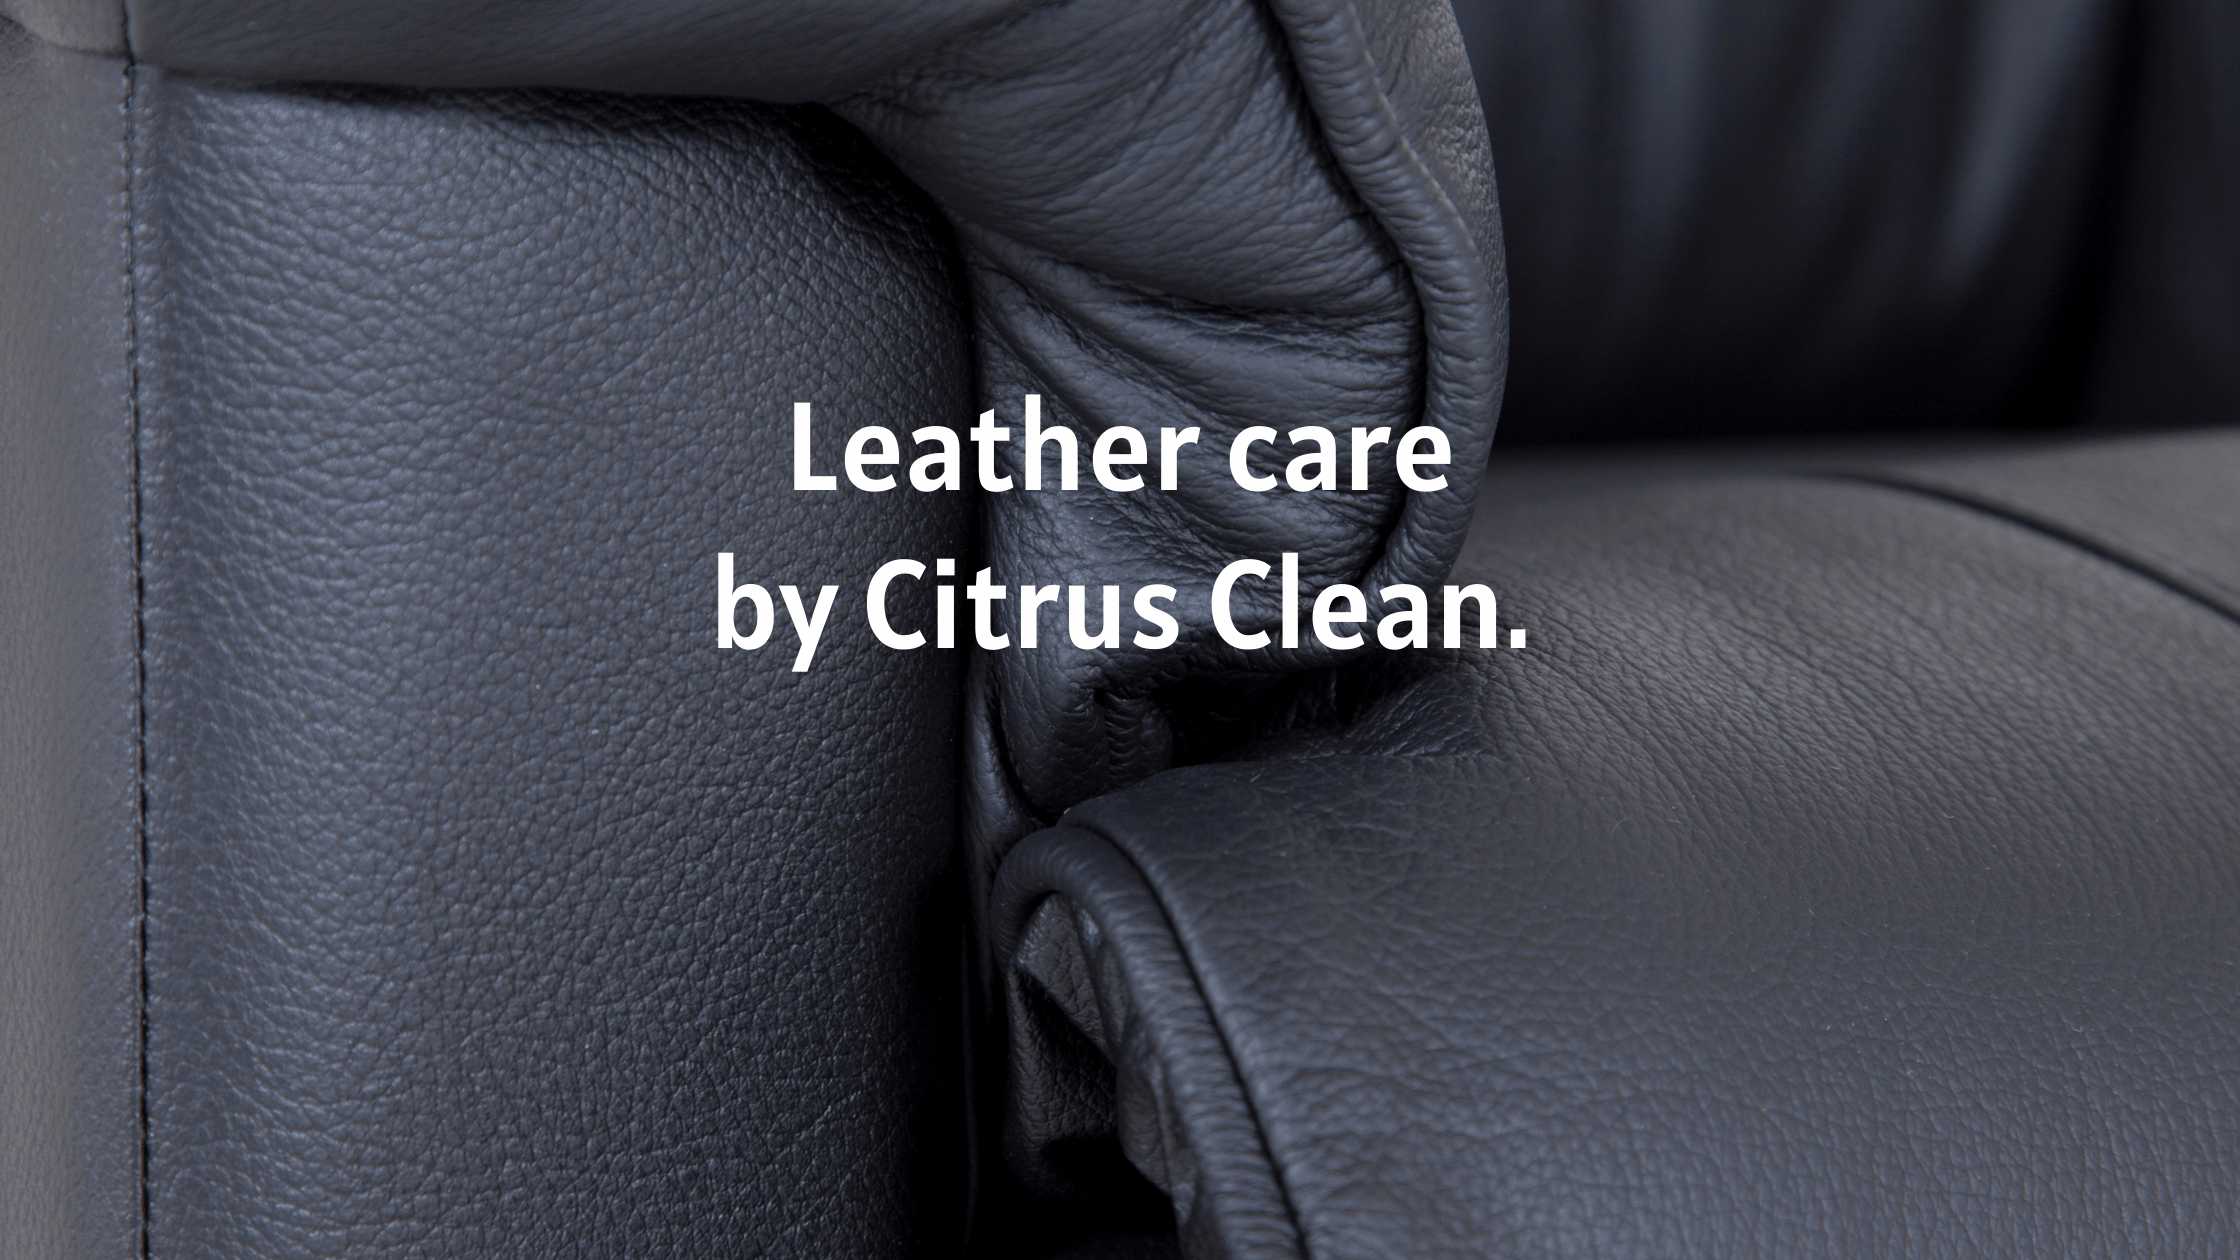 Introducing Leather care by Citrus Clean 17